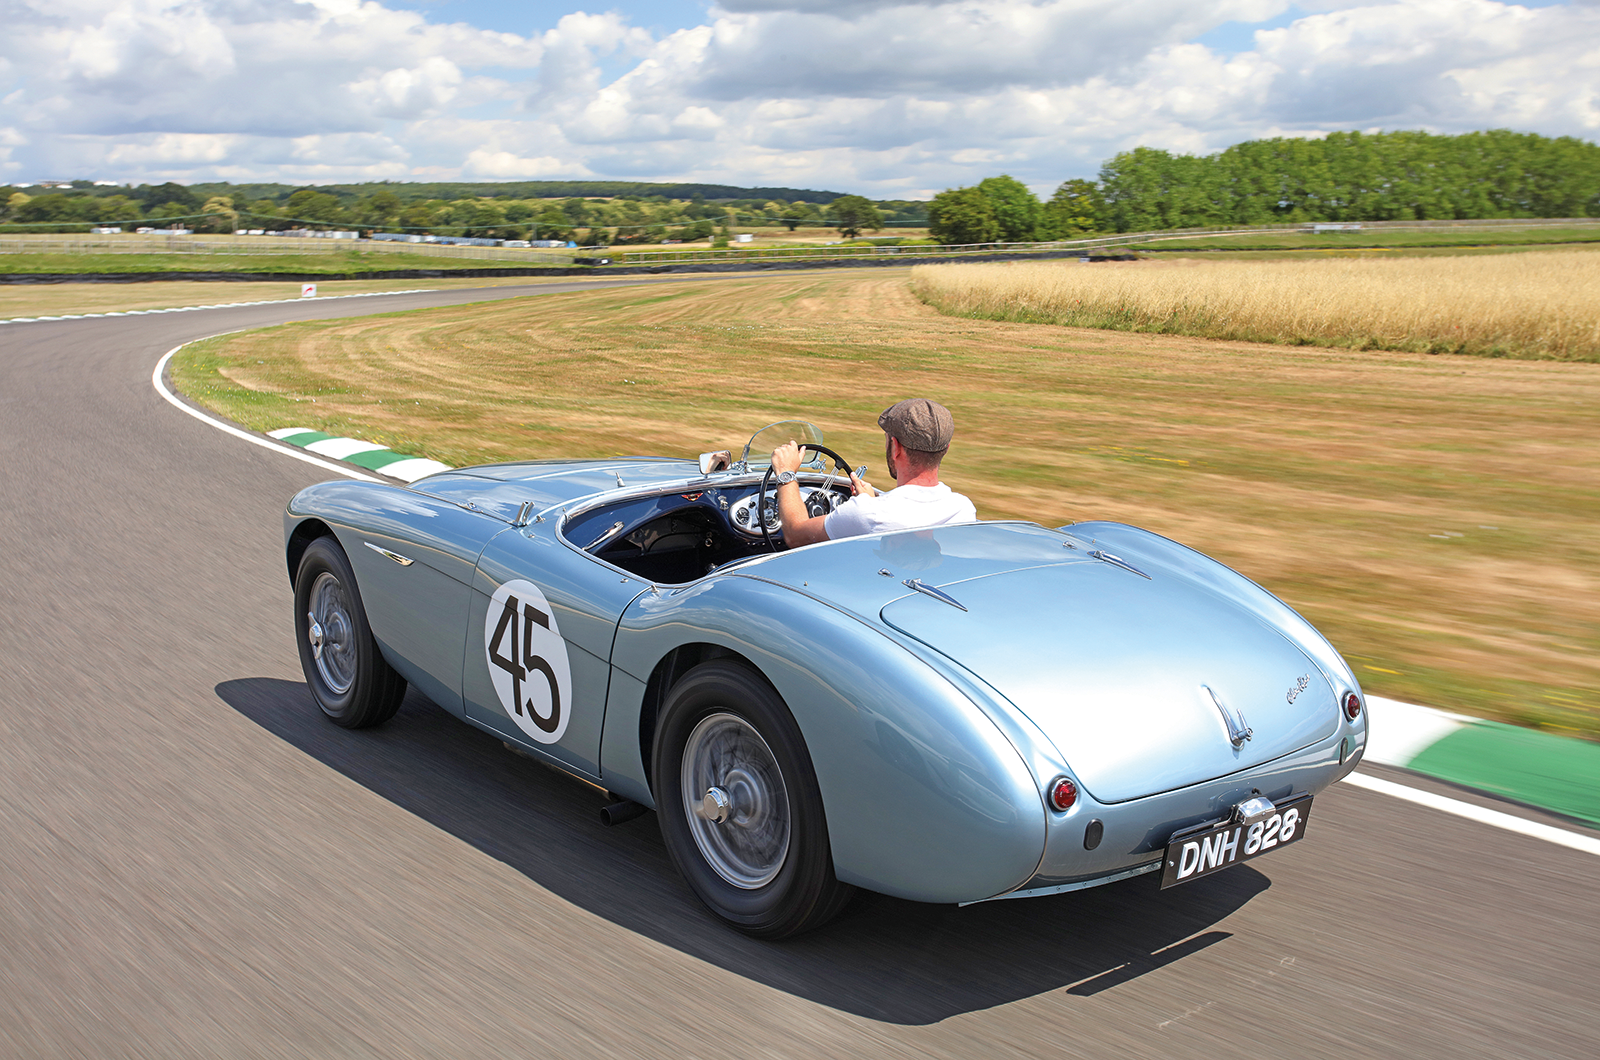 Classic & Sports Car – This unassuming Austin-Healey 100 is a pioneer privateer